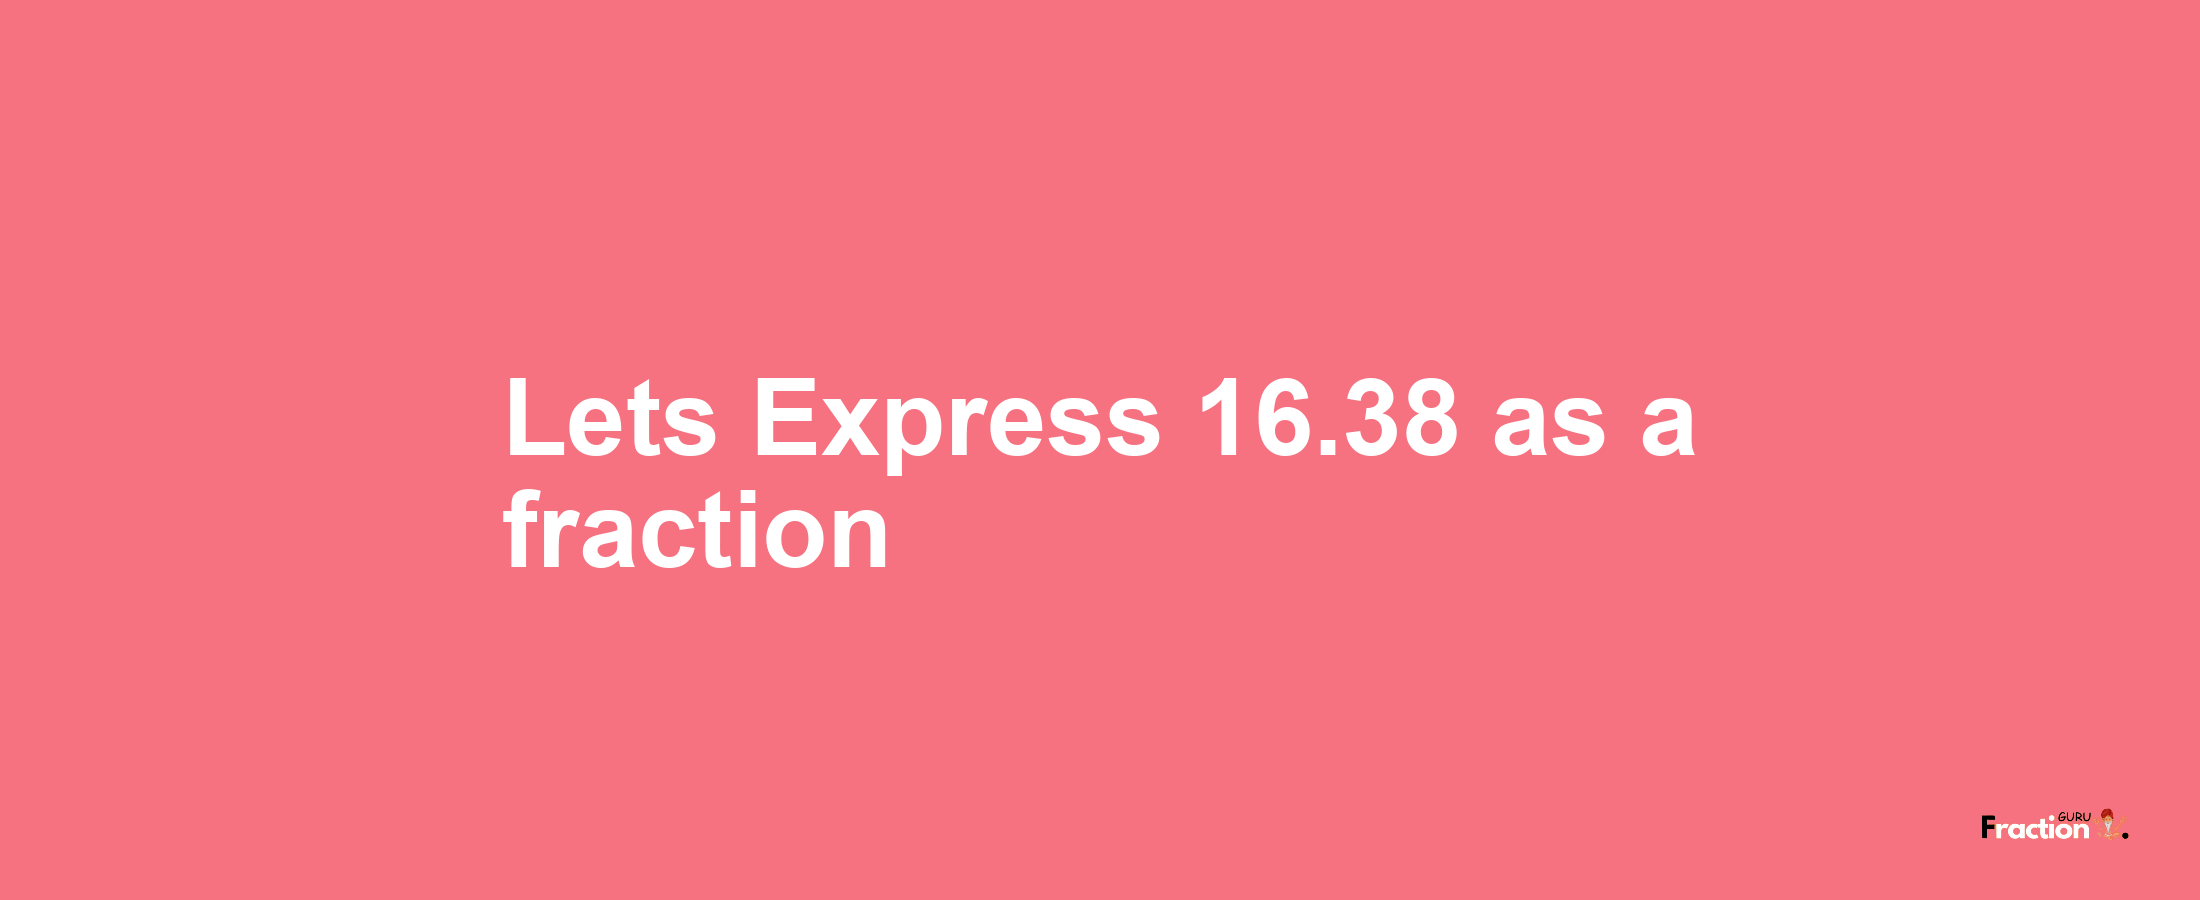 Lets Express 16.38 as afraction